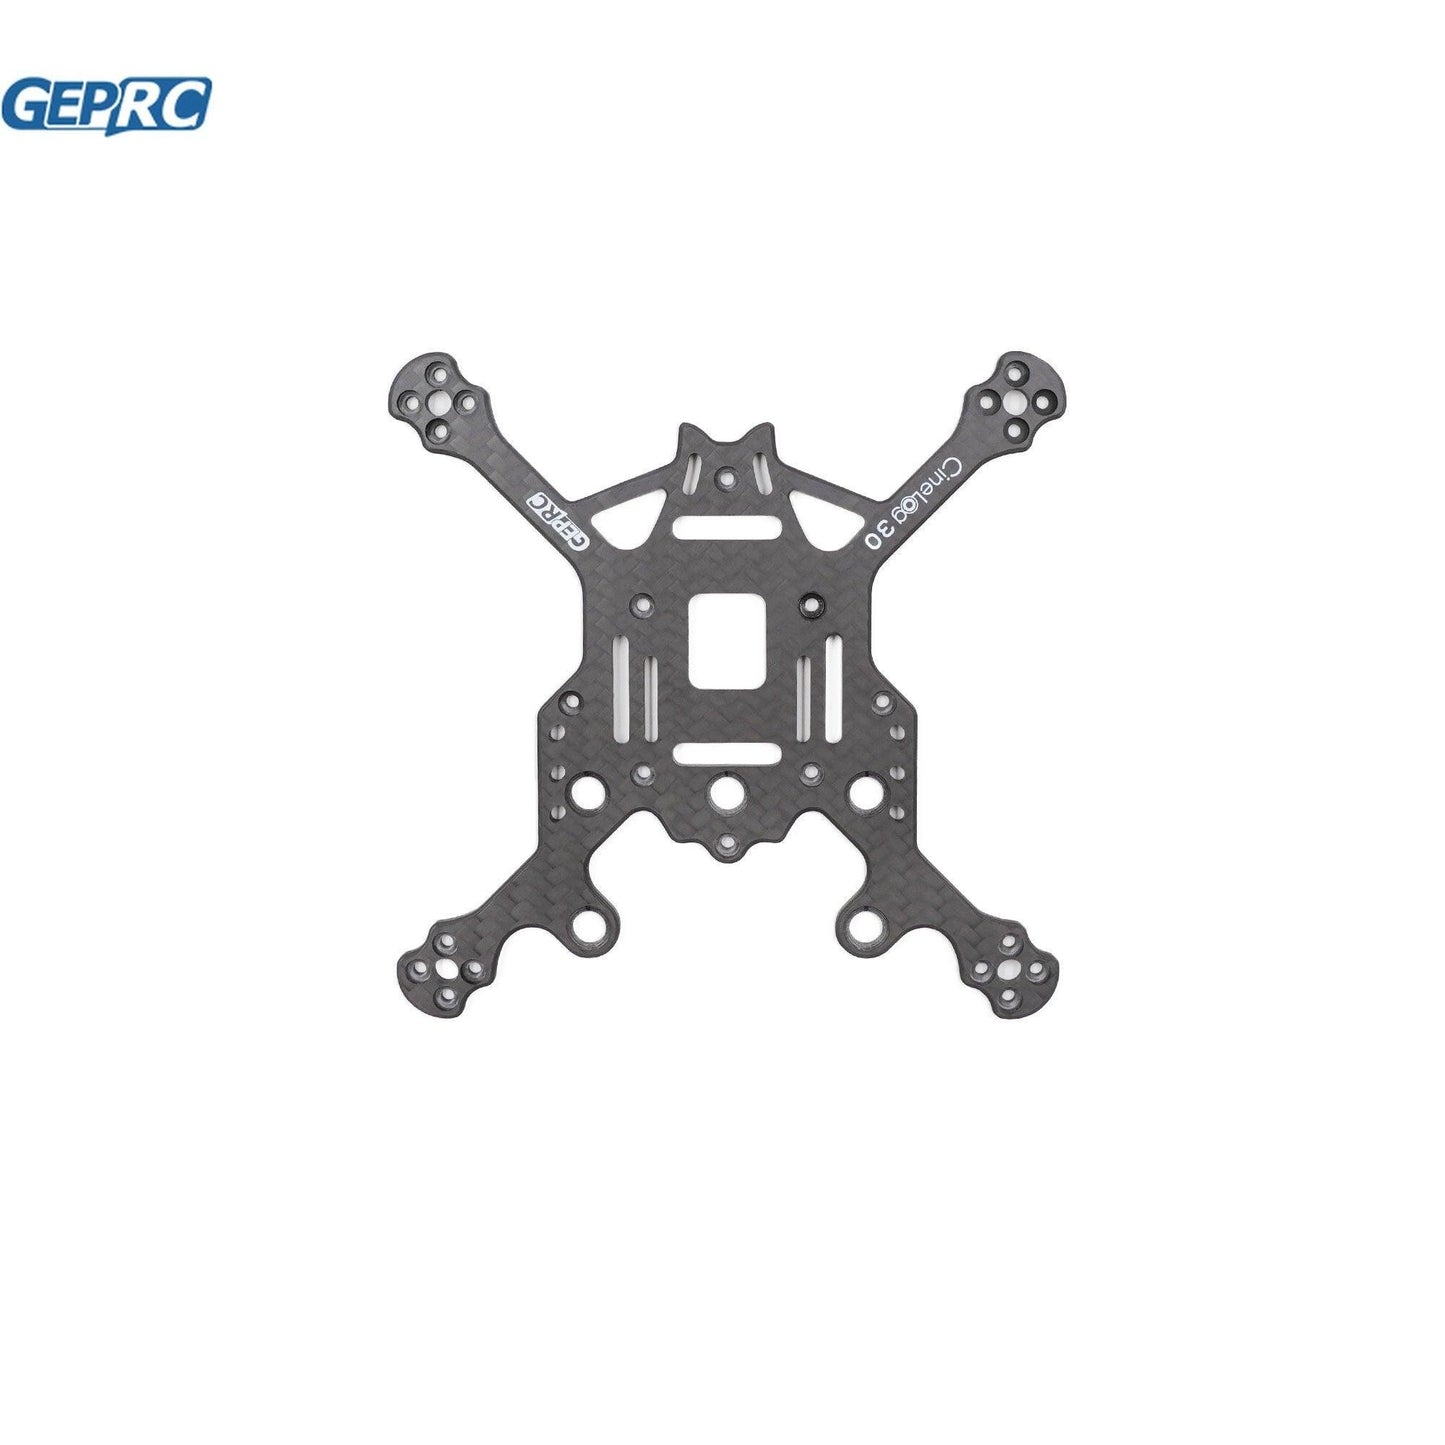 GEPRC GEP-CL30 FPV Frame Kit Parts Suitable For Cinelog30 Series Drone For DIY RC FPV Quadcopter Drone Replacement Accessories Parts - RCDrone